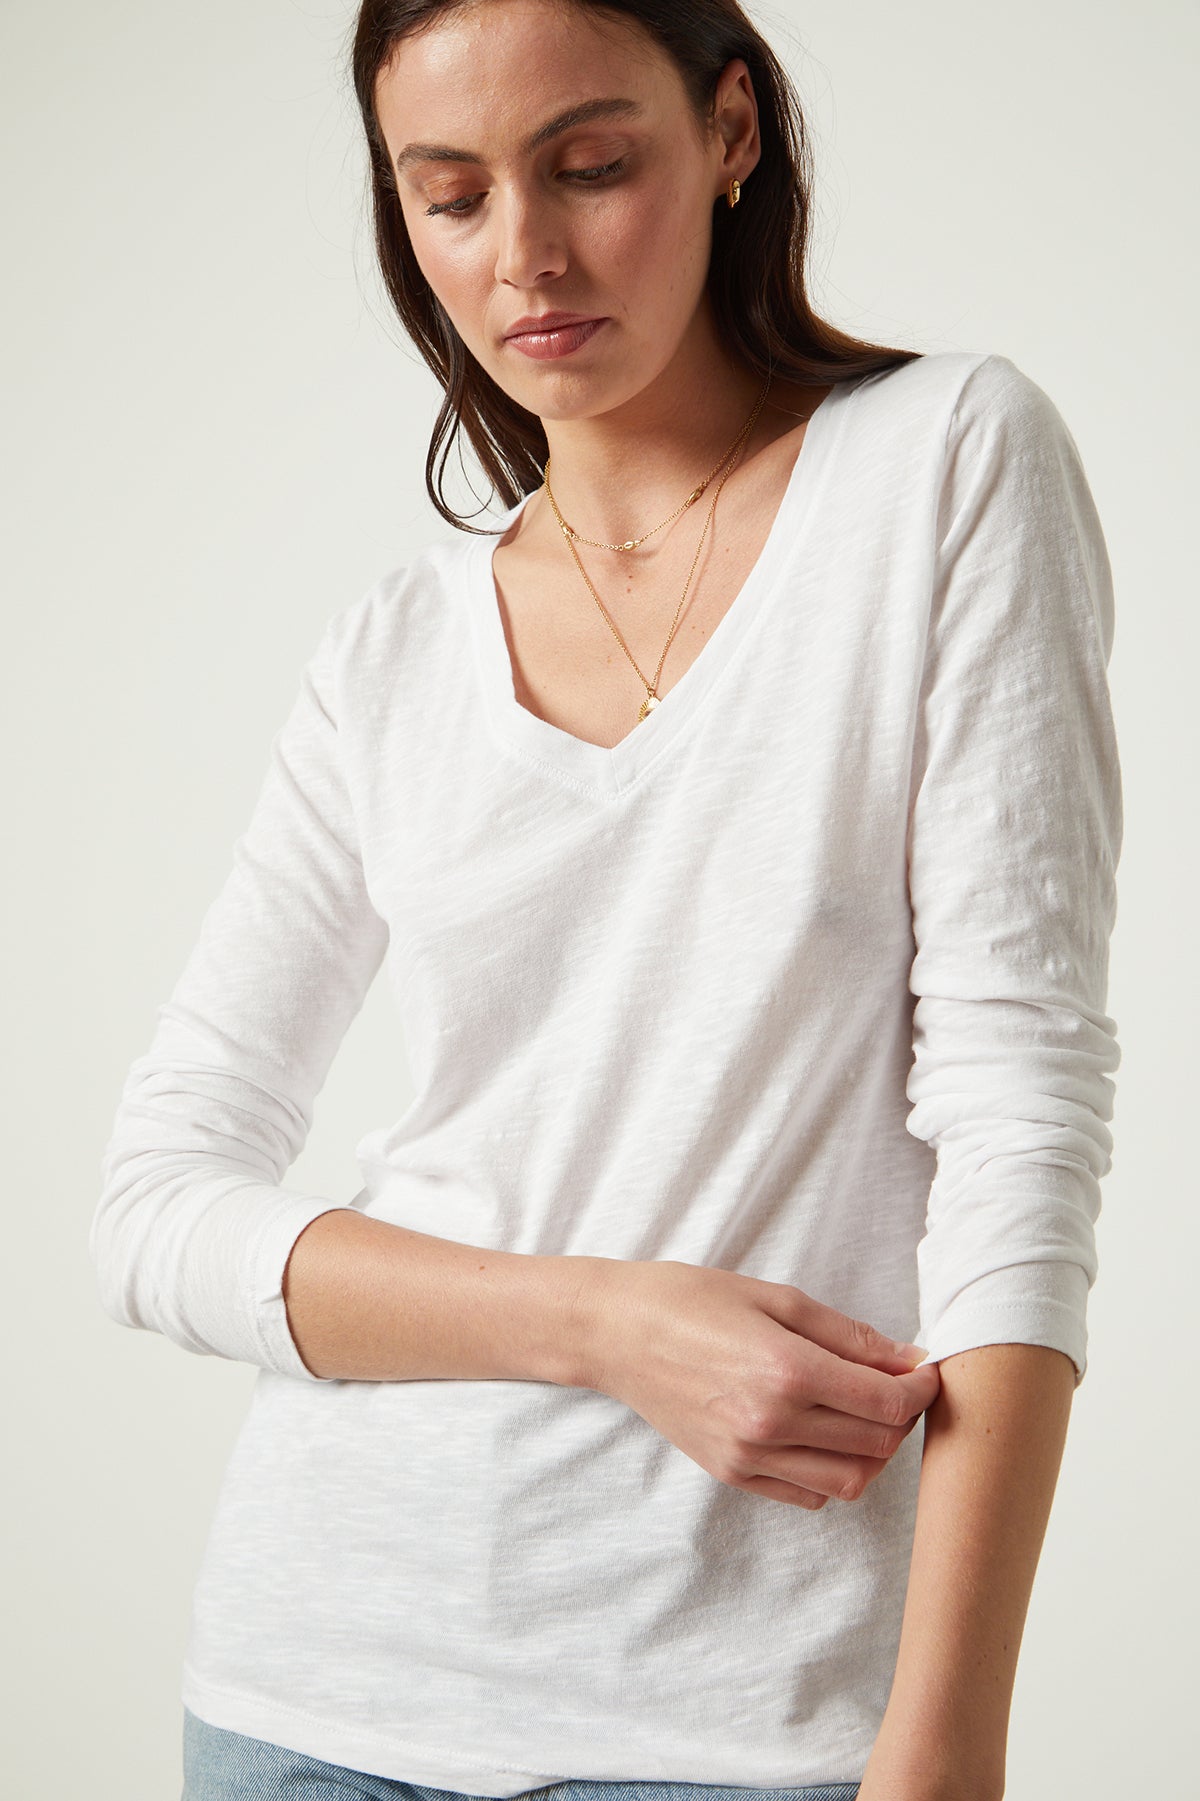 Blaire Original Slub Long Sleeve Tee with V Neck in white close up front detail-25261593264321